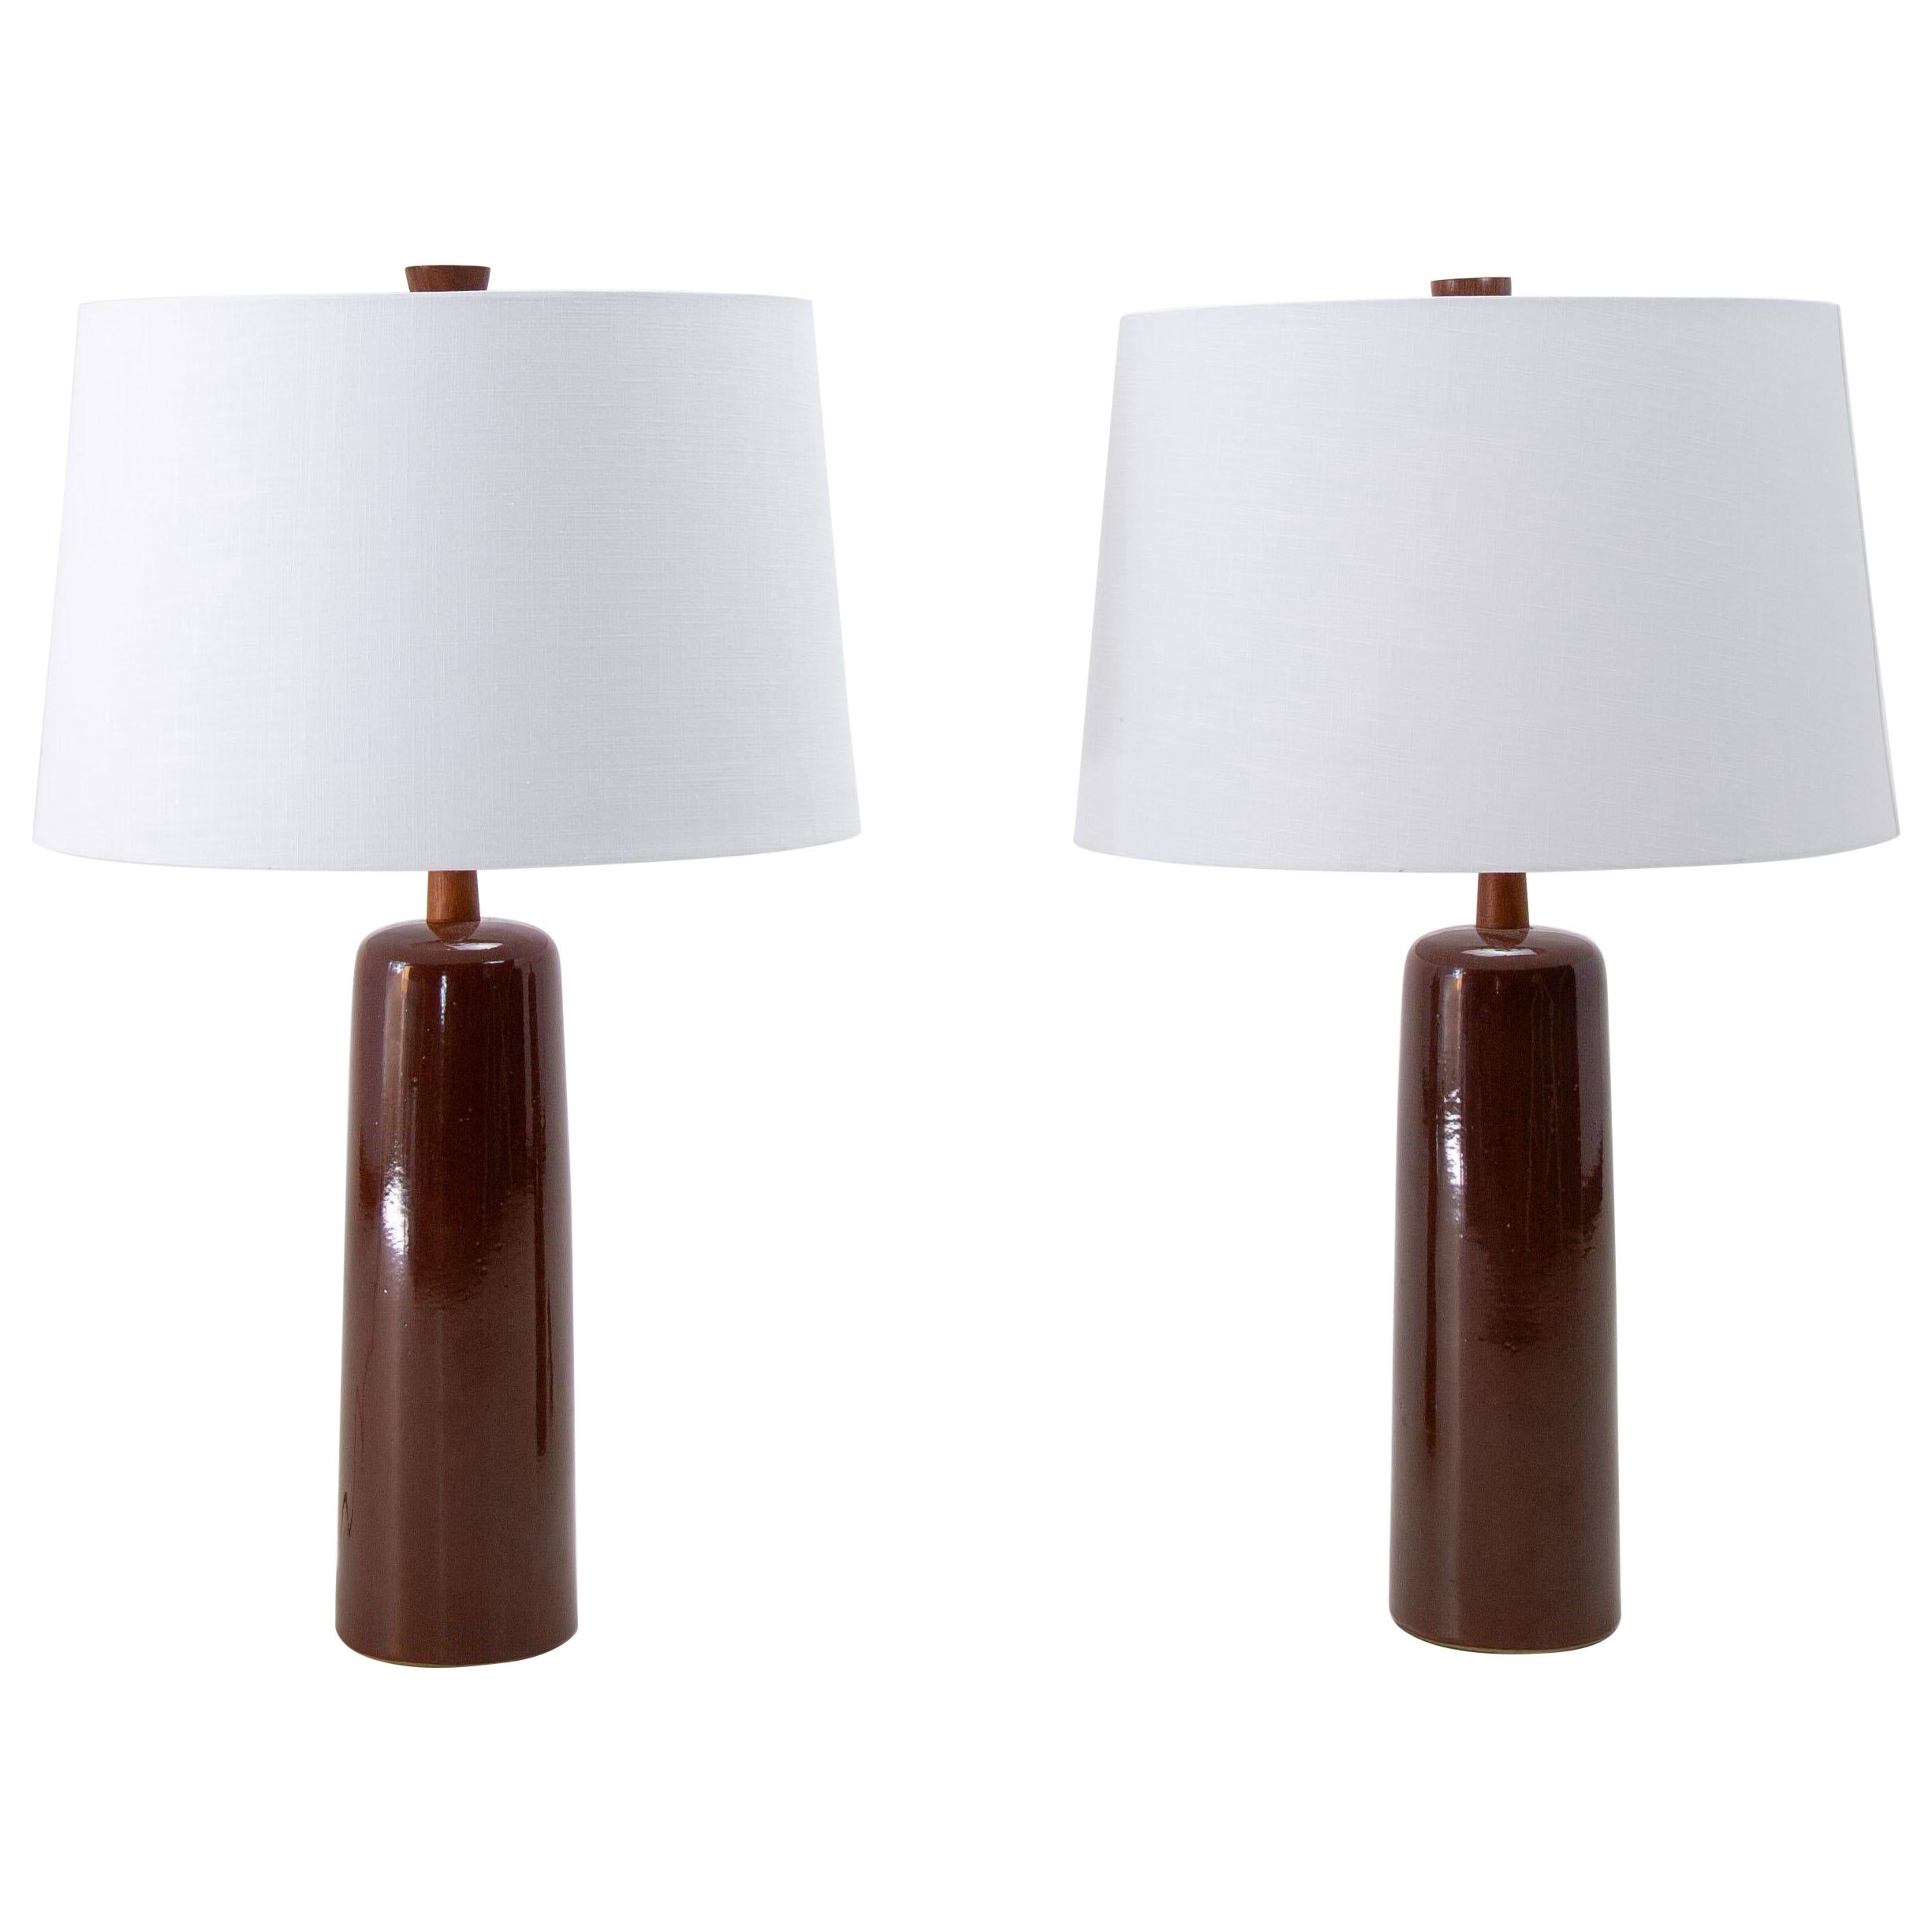 A pair of Maroon Jane and Gordon Martz table lamps M41 mid century modern For Sale